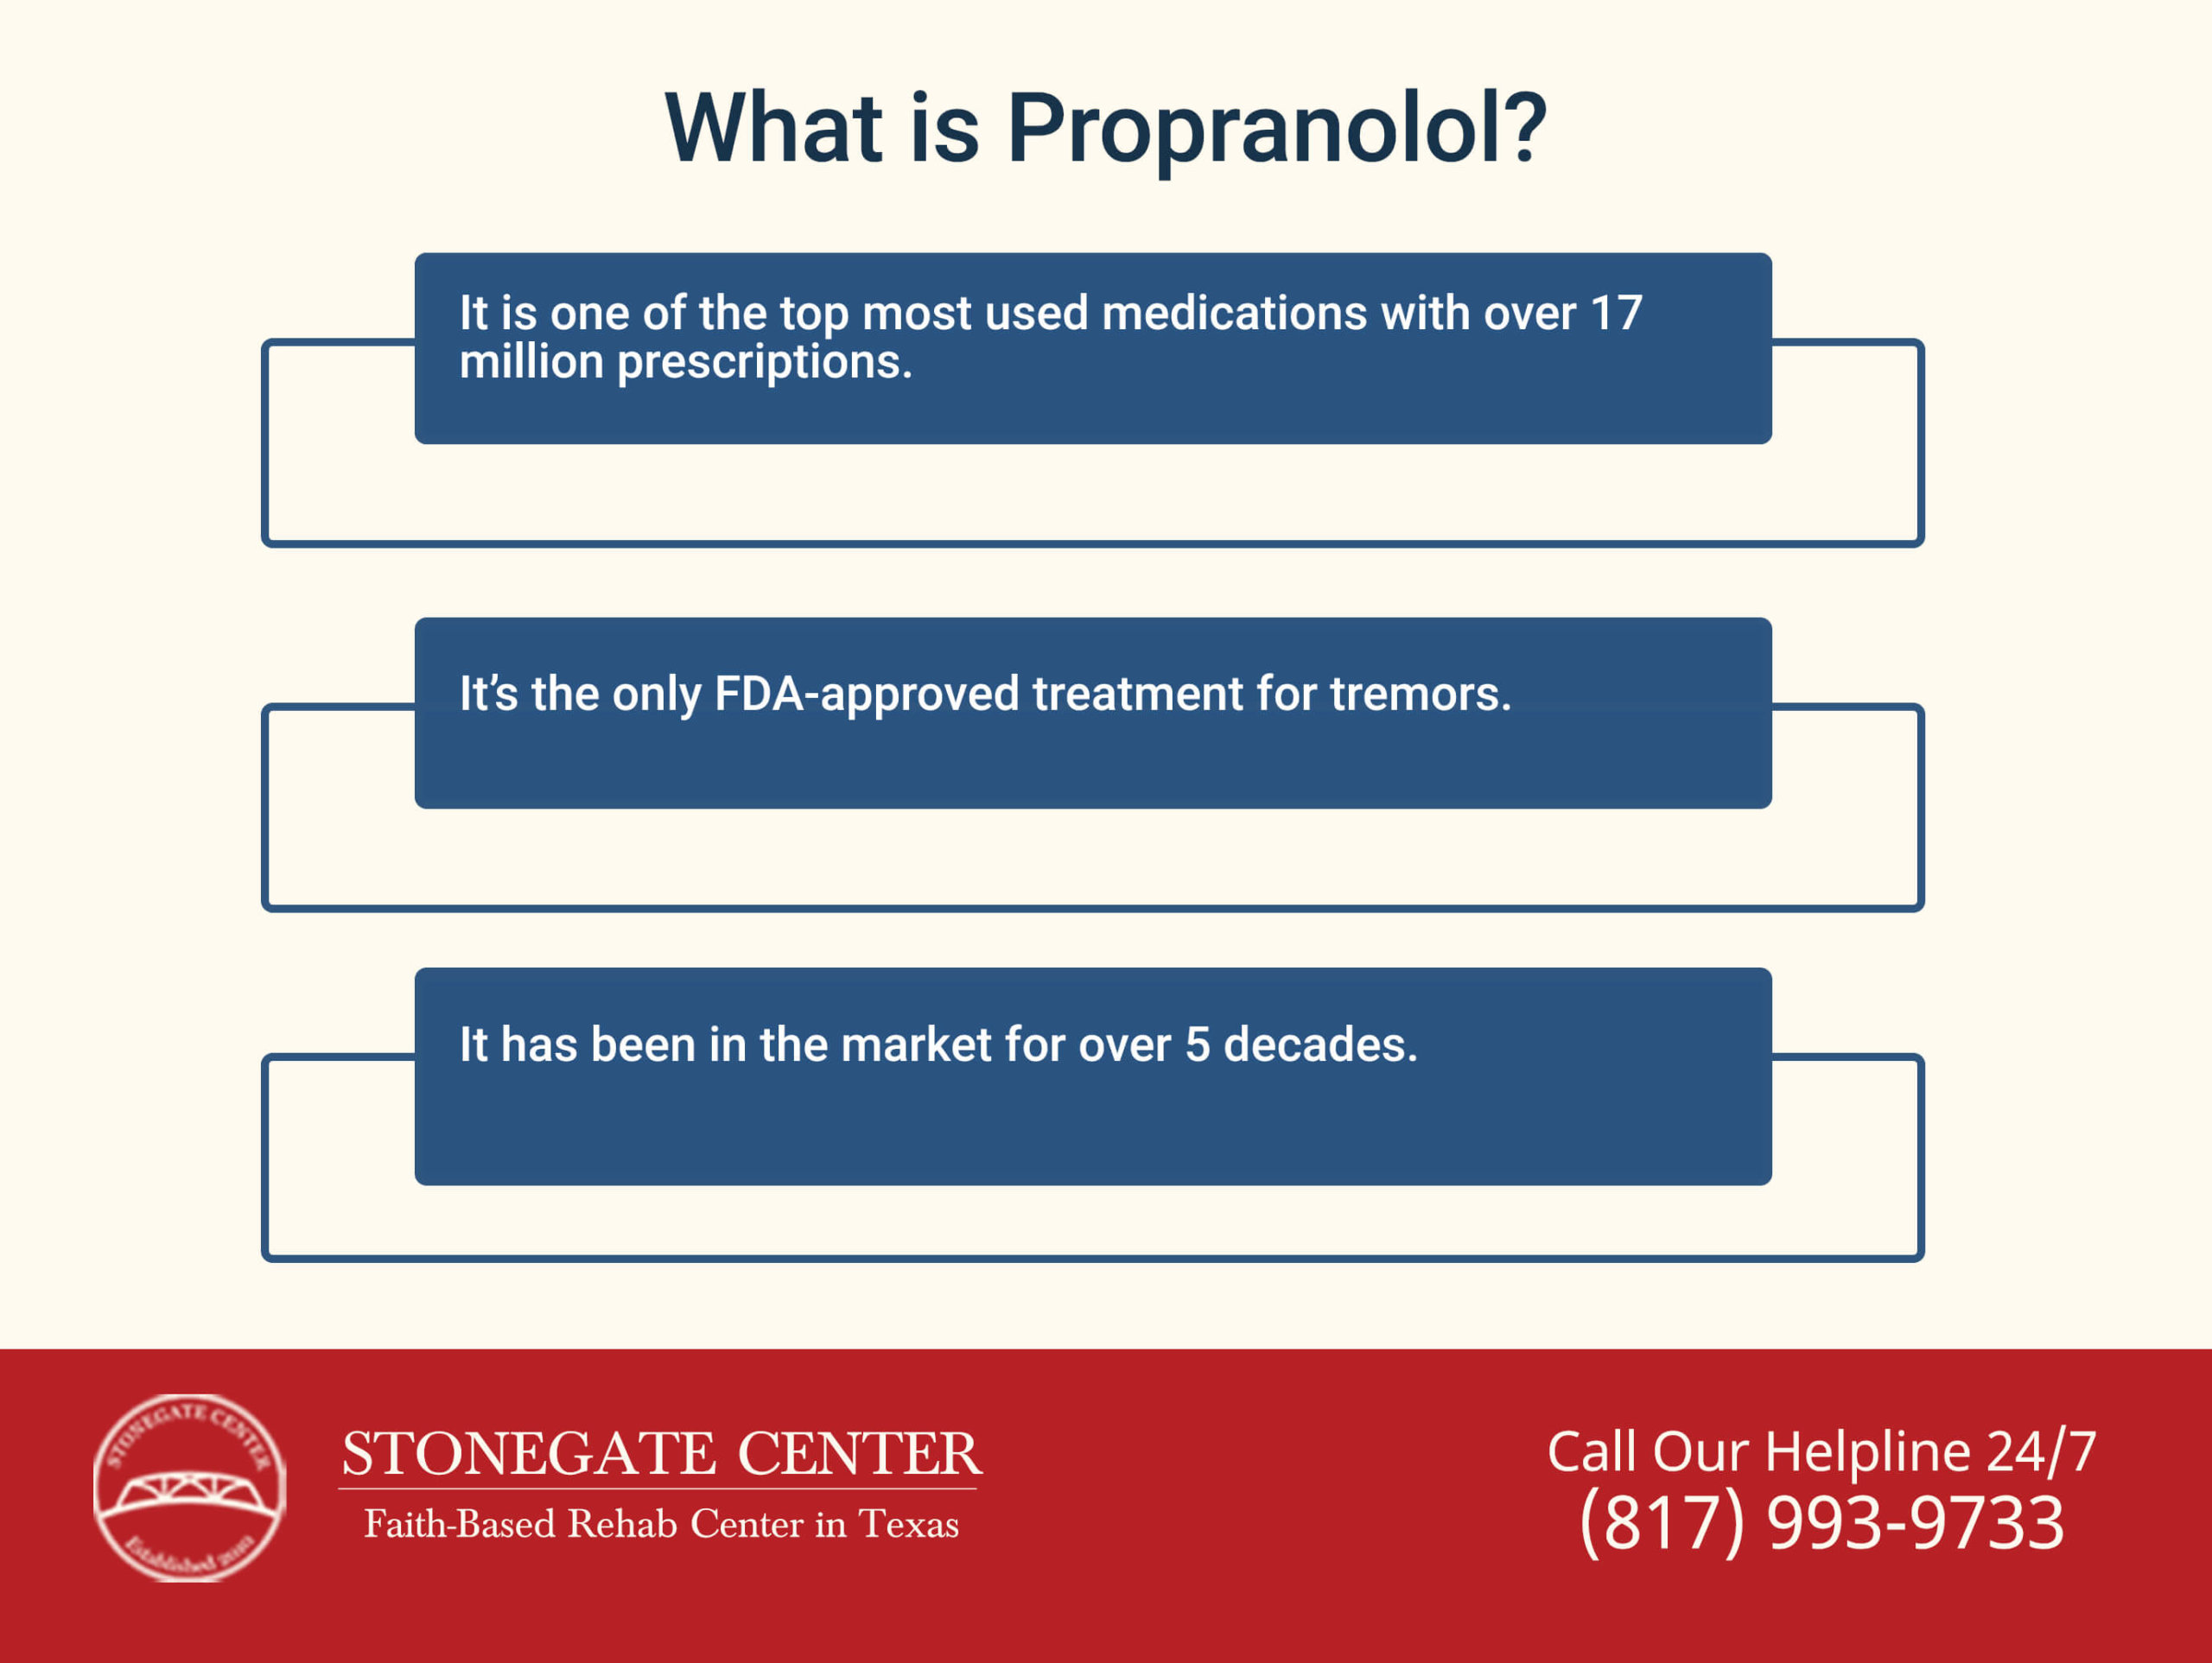 Stonegate Center Blog - Is Propranolol One of the Most Common Medications Given at Detox Centers? - What is Propranolol